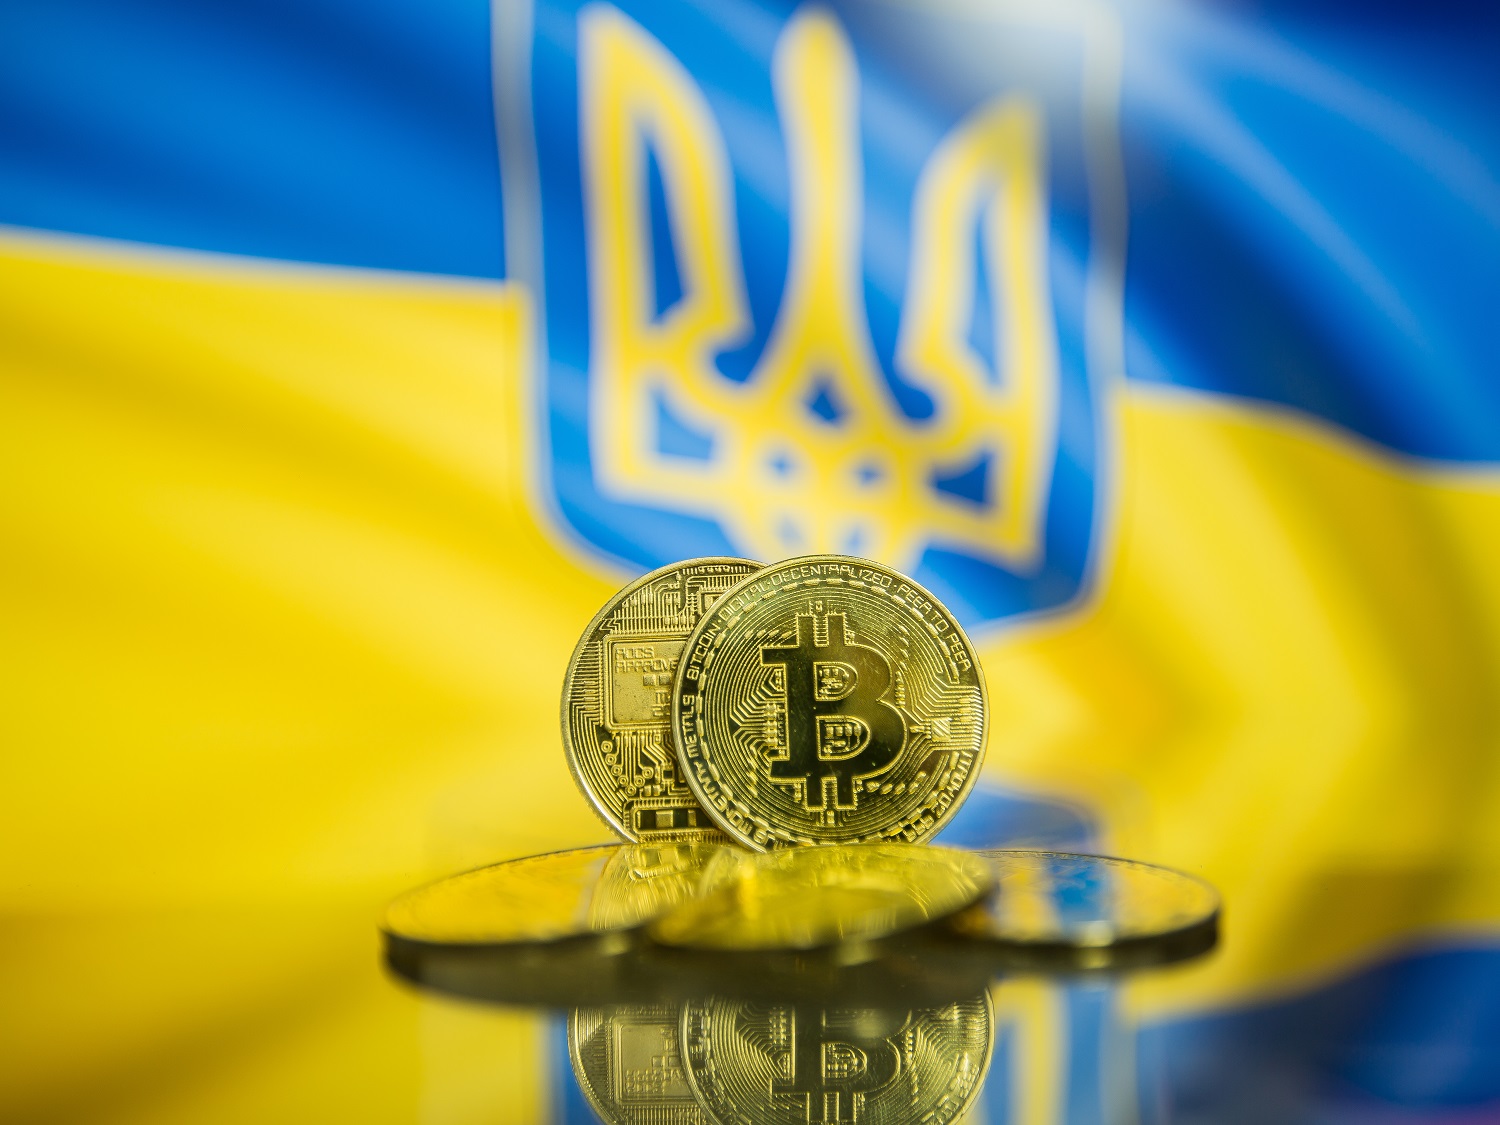 Five metal coins decorated with the Bitcoin logo against the backdrop of a Ukrainian flag, featuring the trident-style national symbol.